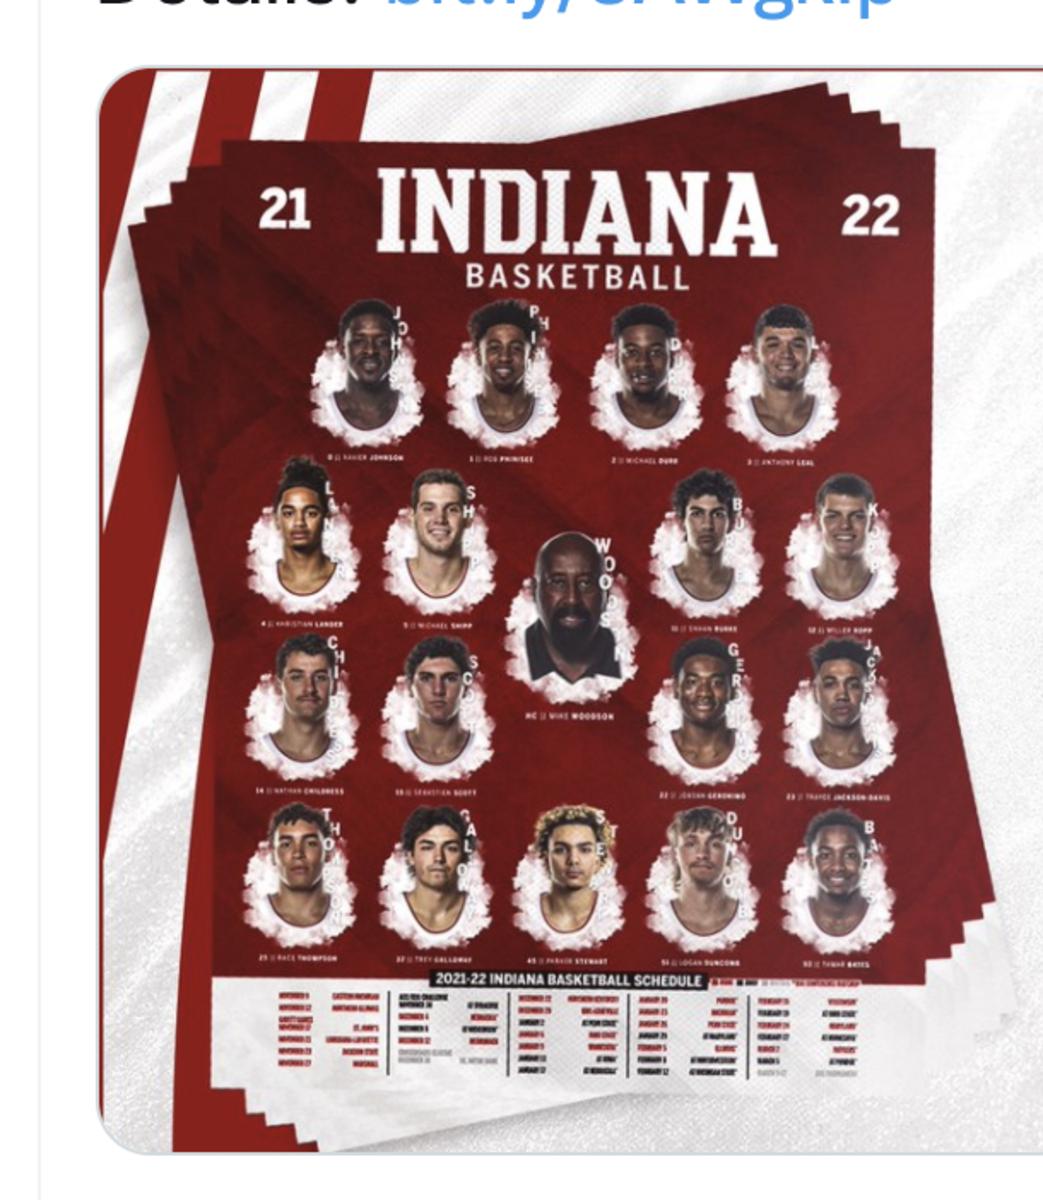 Iu Basketball Schedule 2022 Indiana Basketball Schedule Posters Available At Hoosier Hysteria - Sports  Illustrated Indiana Hoosiers News, Analysis And More